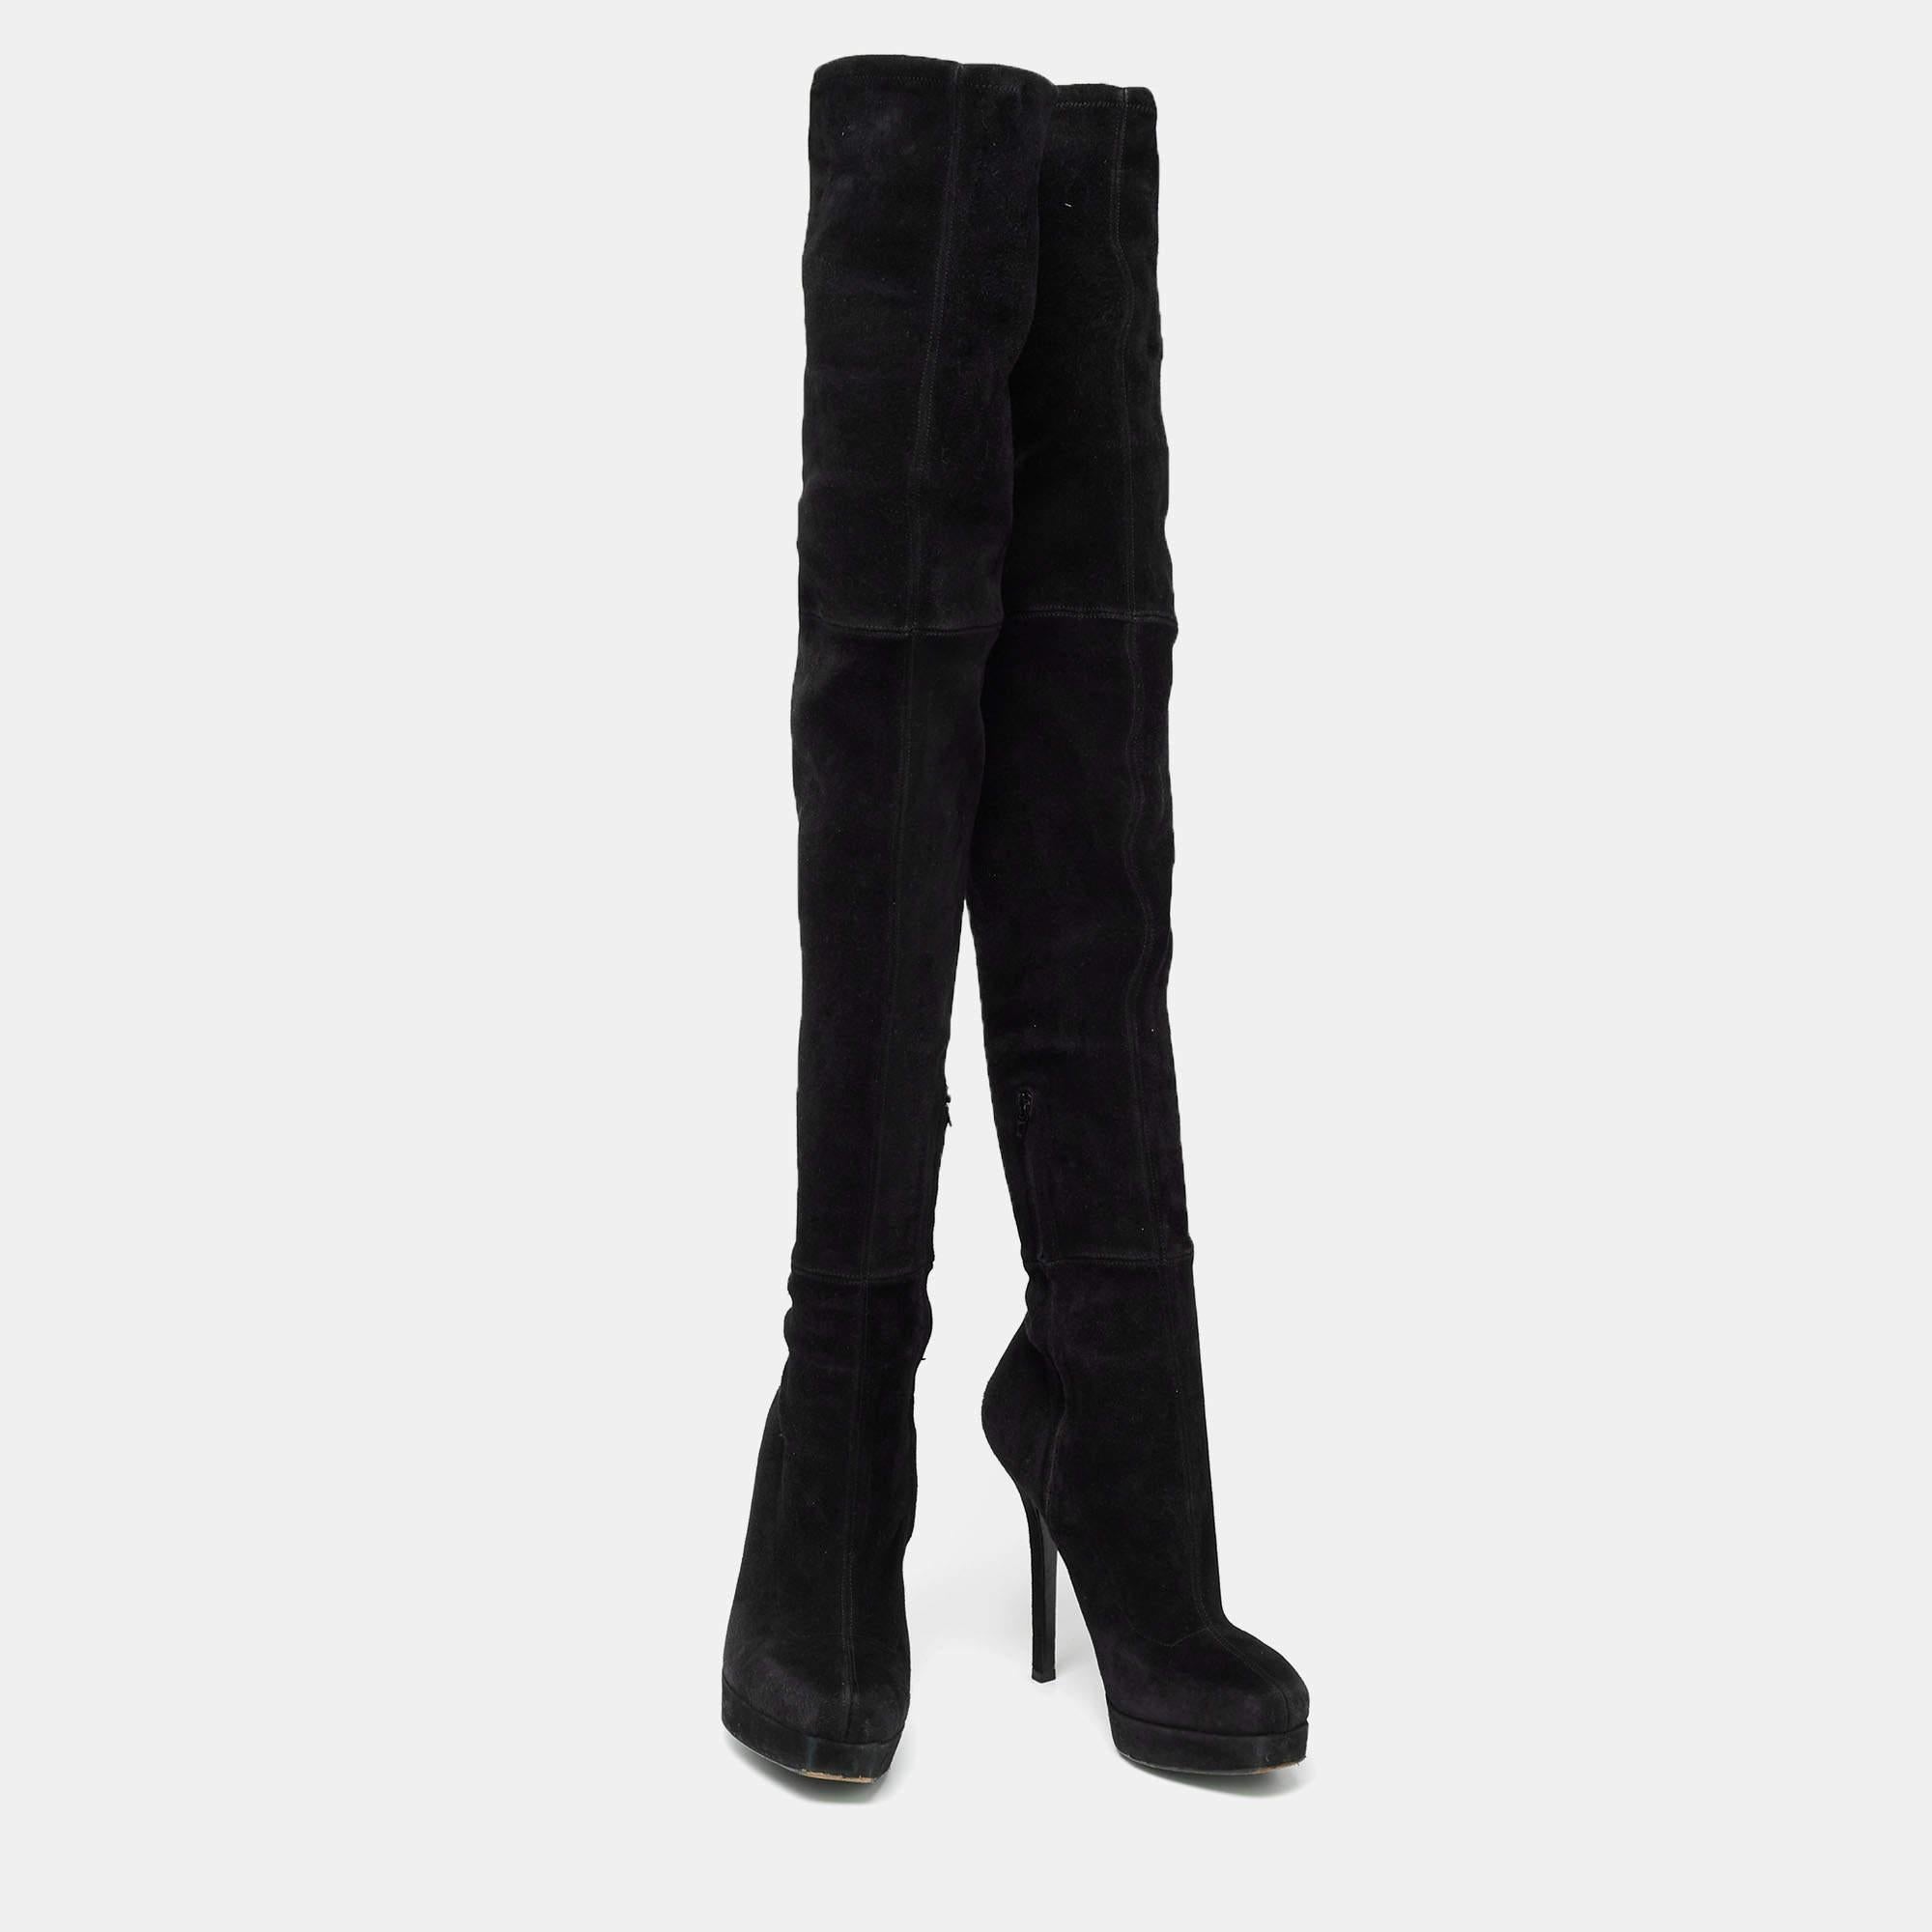 Women's Gucci Black Suede Platform Over the Knee Boots Size 38.5 For Sale